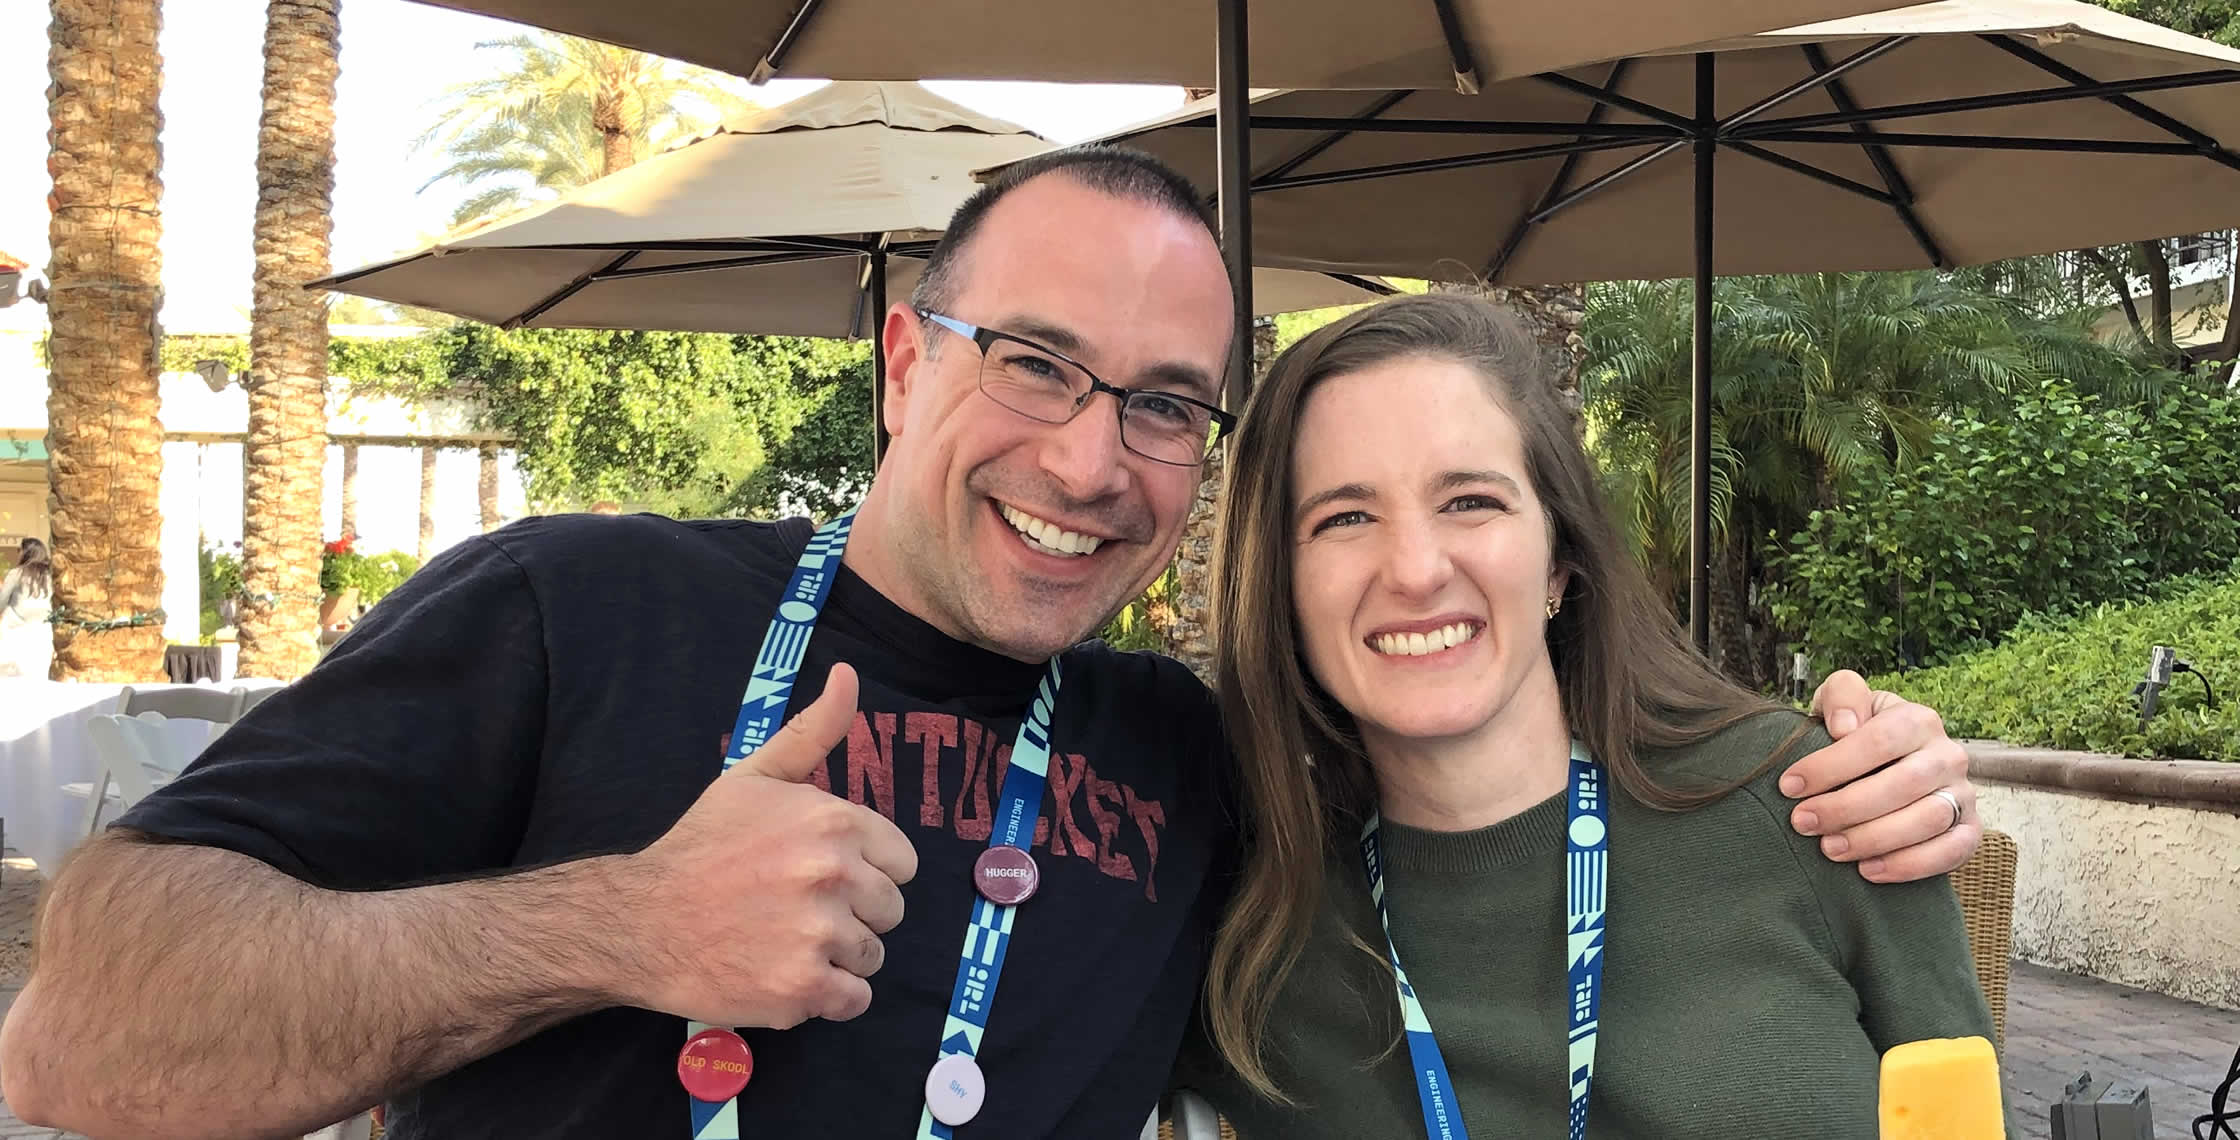 Ben Nadel at InVision In Real Life (IRL) 2019 (Phoenix, AZ) with: Keeley Hammond